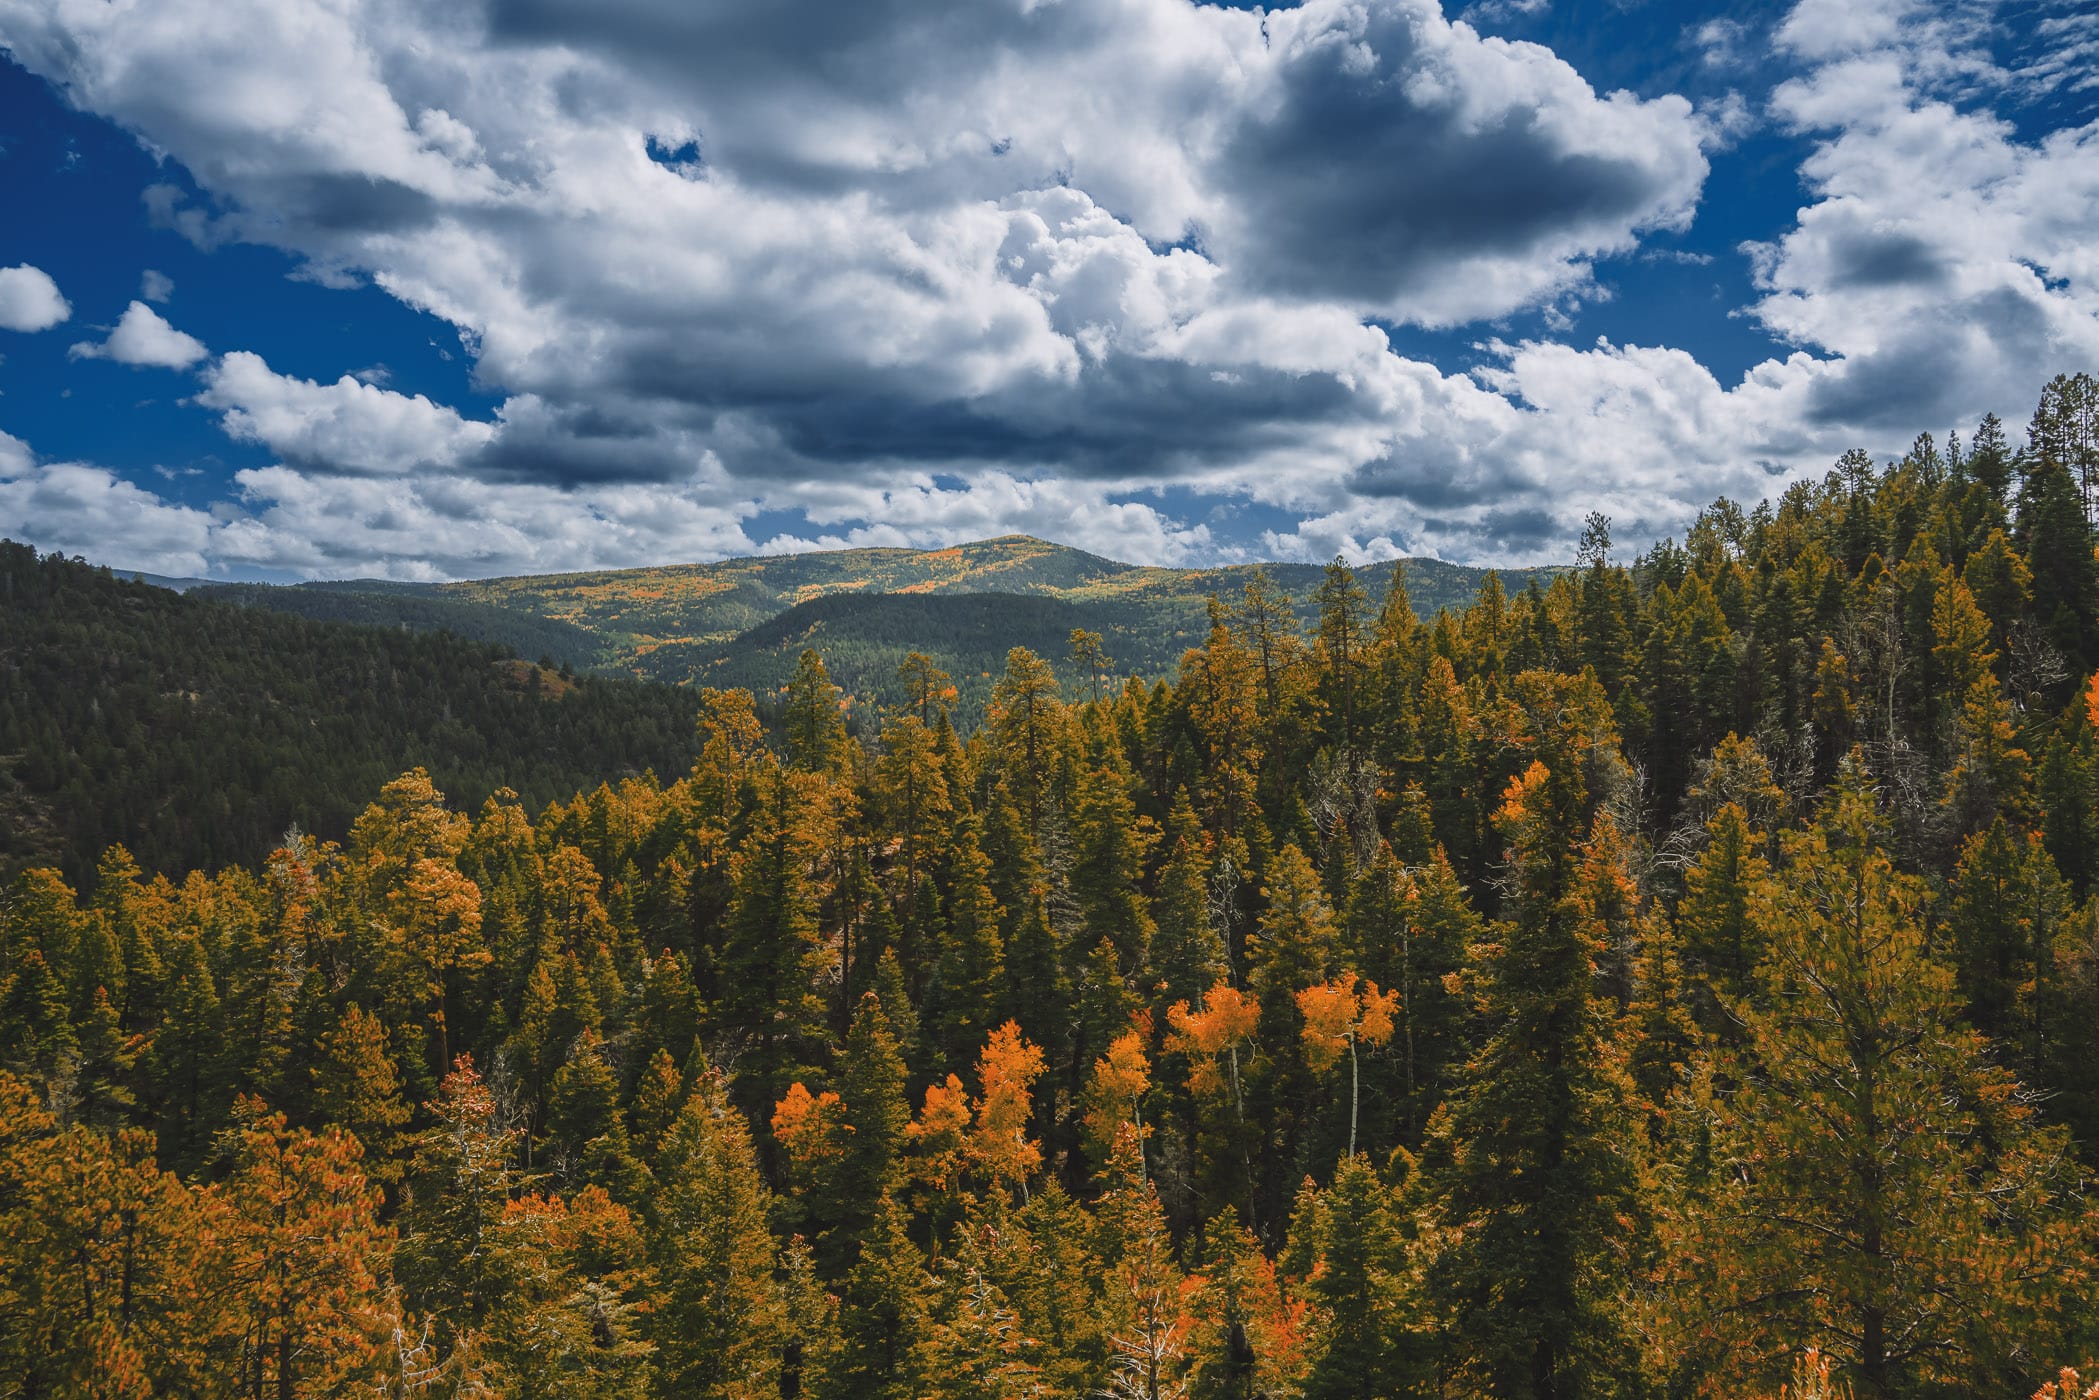 An evergreen forest stretches into the distance in the mountain south of Taos, New Mexico.